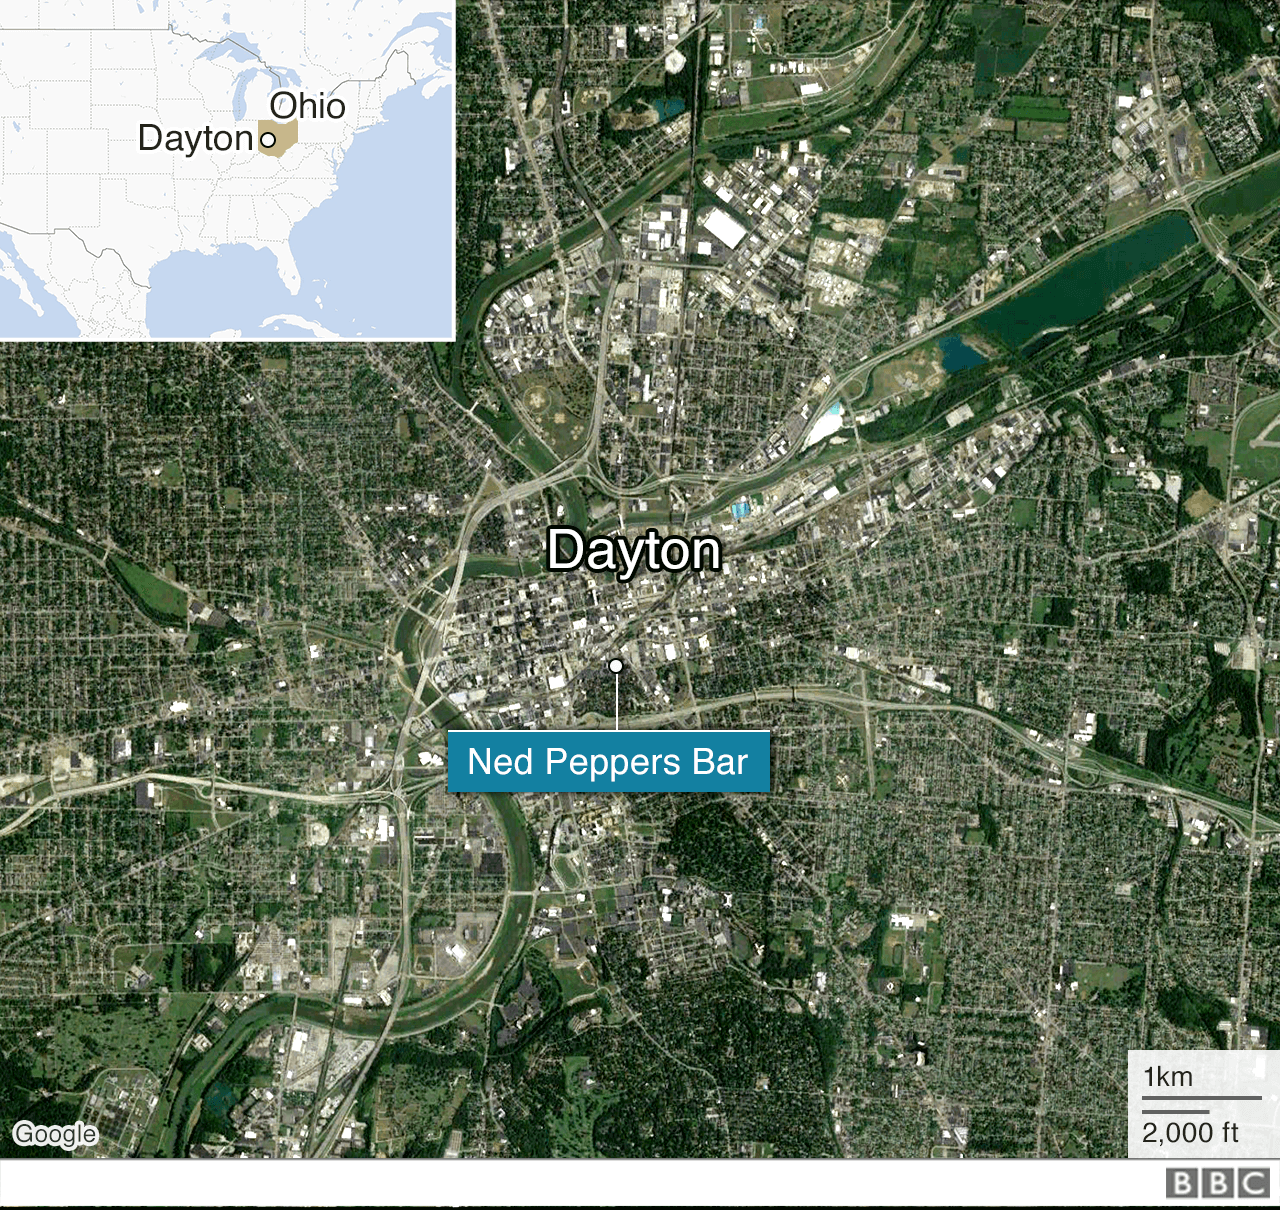 A map shows Ned Peppers Bar in Dayton, Ohio